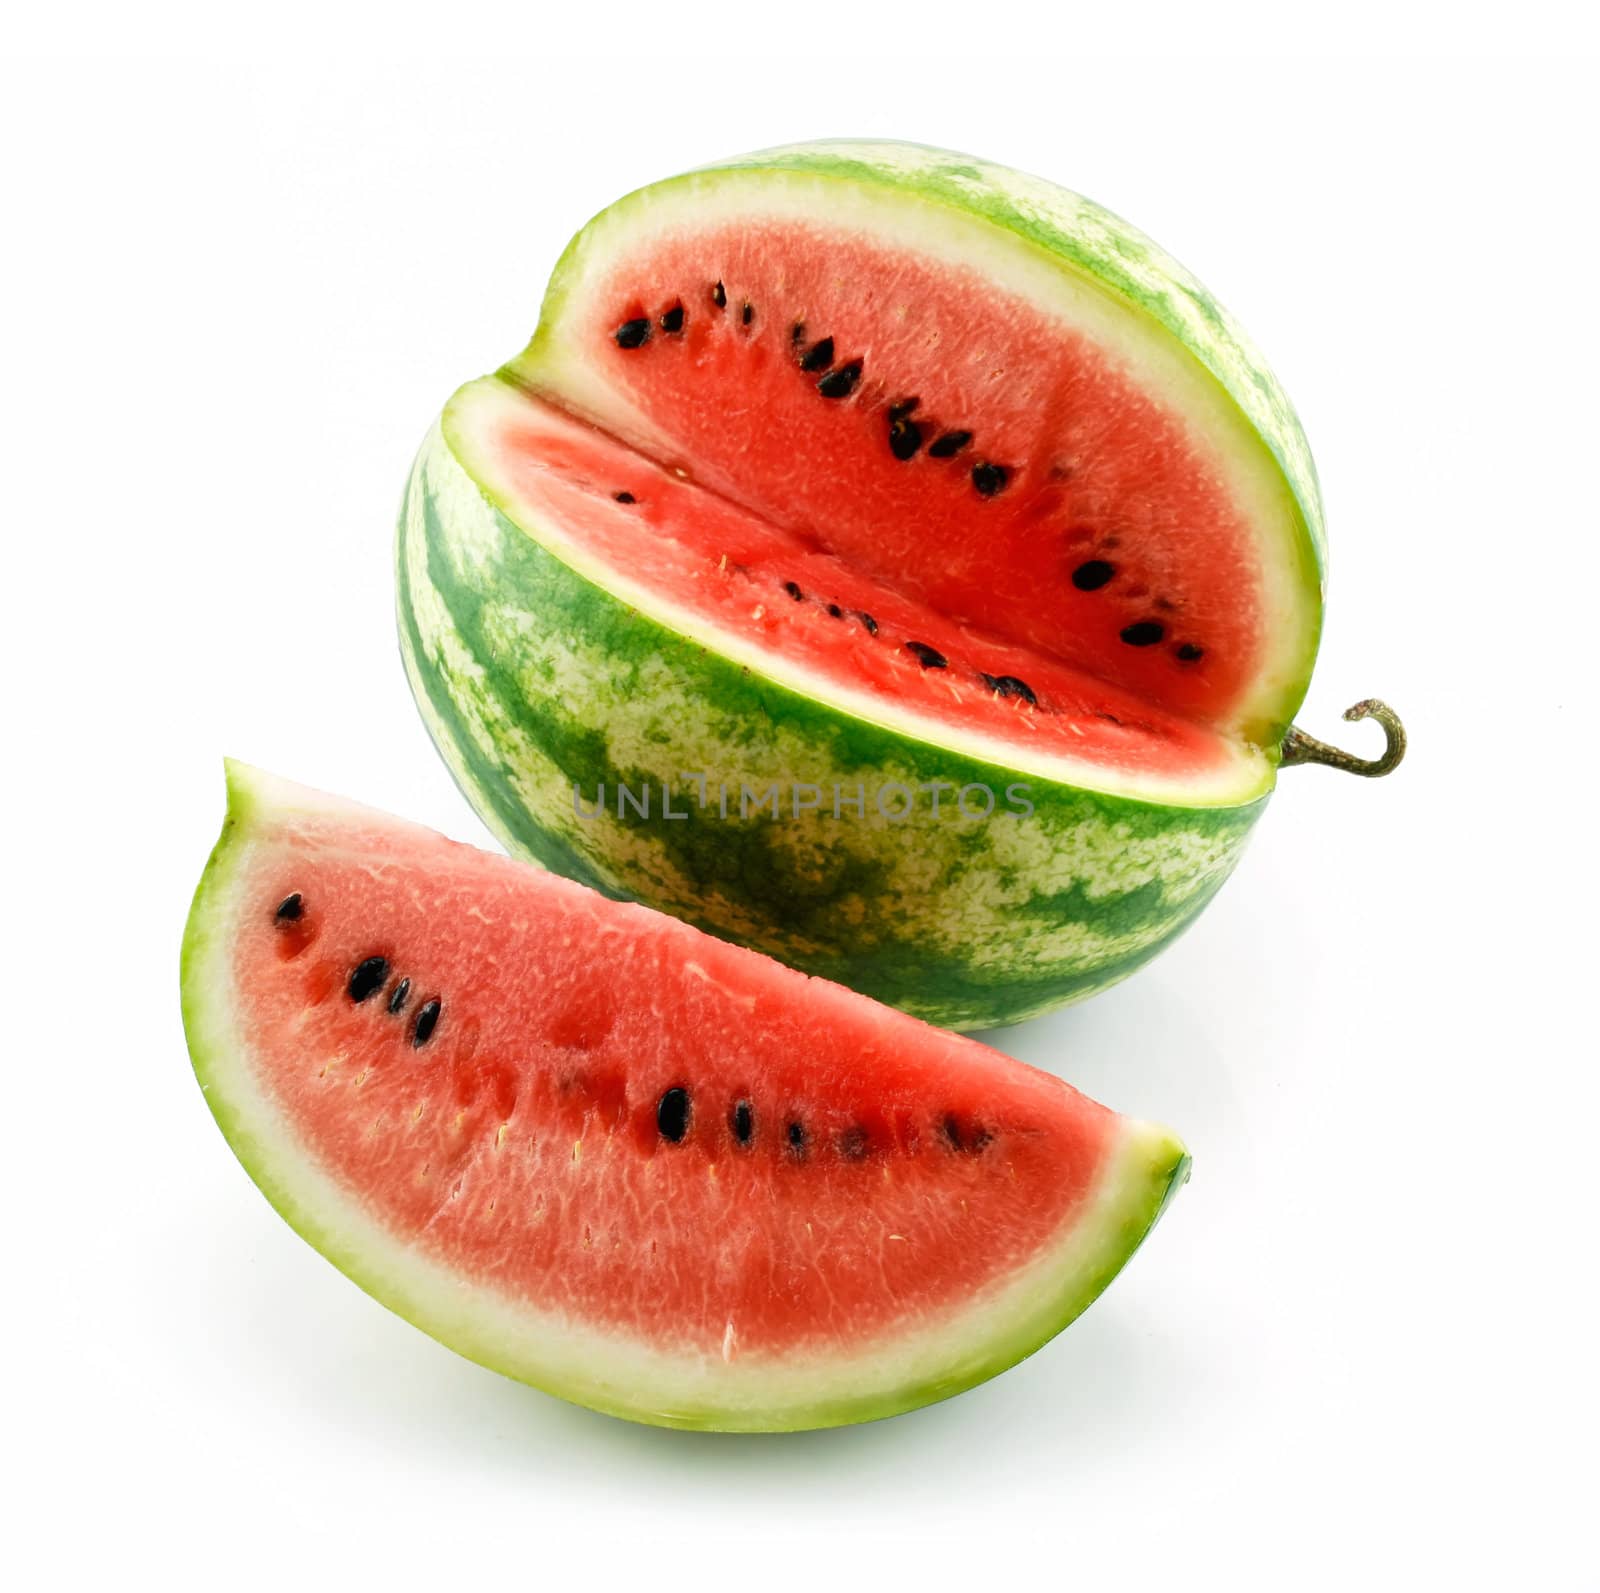 Ripe Sliced Green Watermelon Isolated on White Background